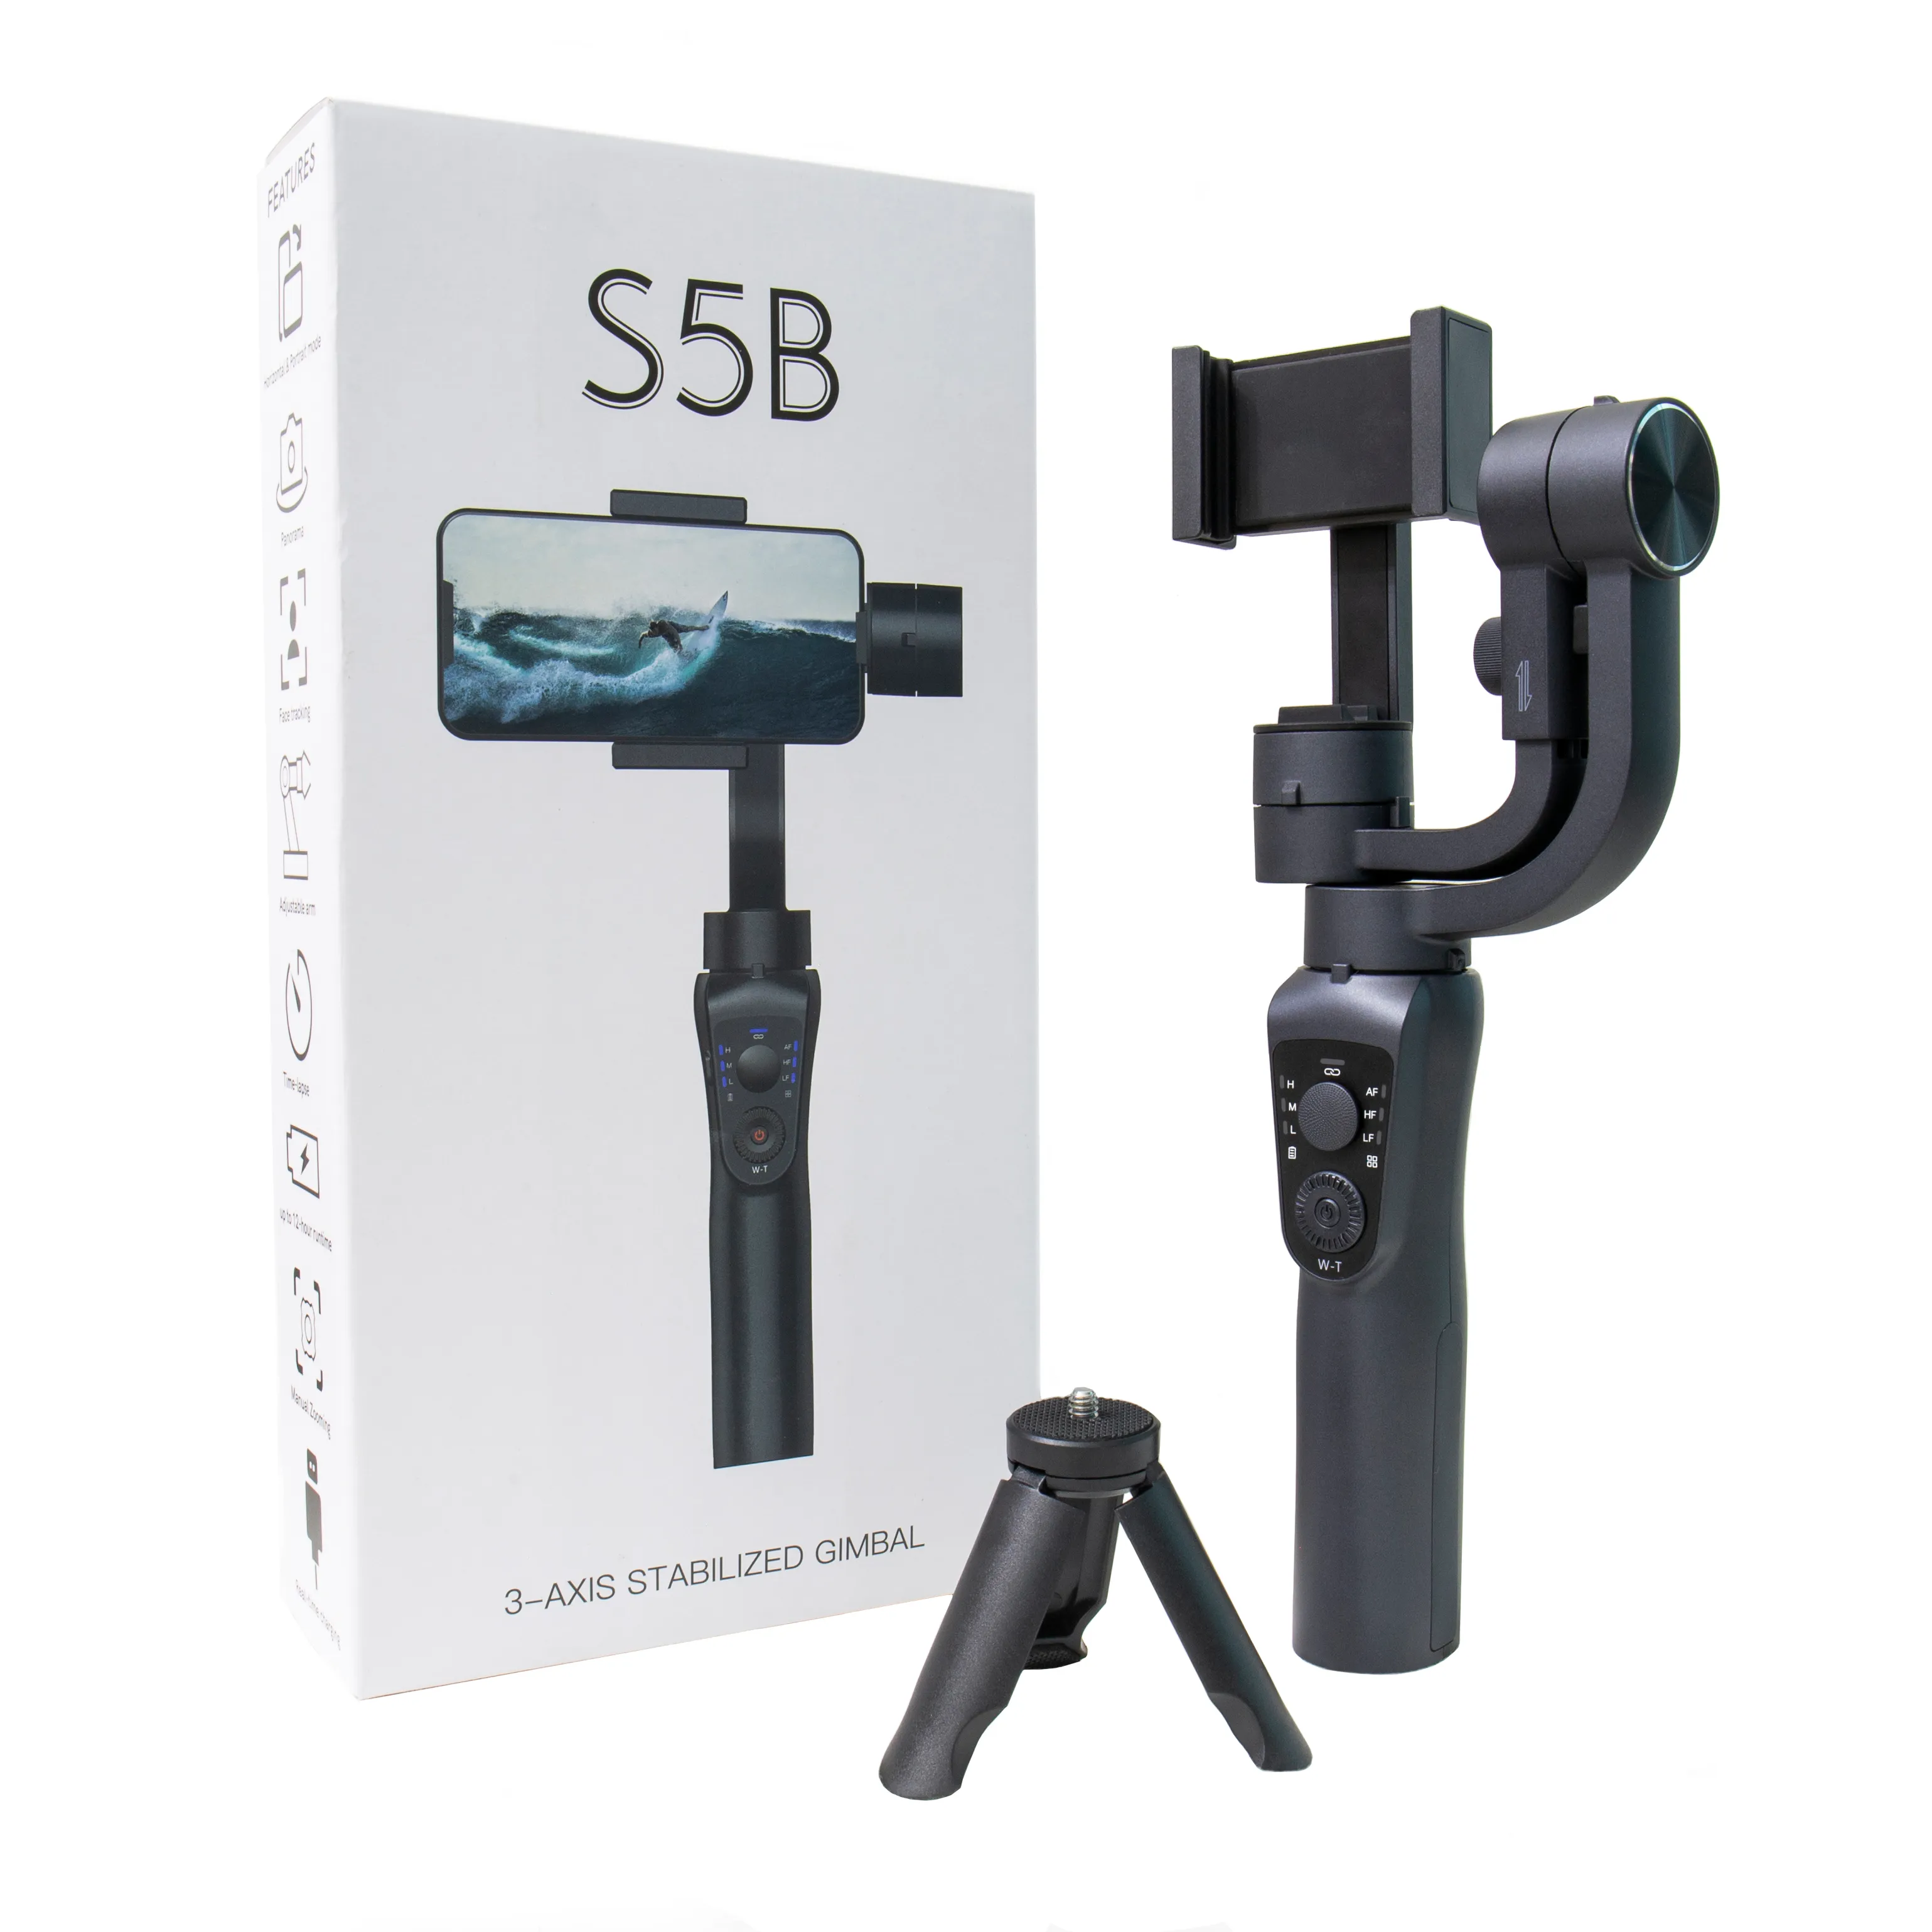 S5B 3 Axis Gimbal Handheld Smartphone Stabilizer App Support Auto tracking suitable for Smartphones